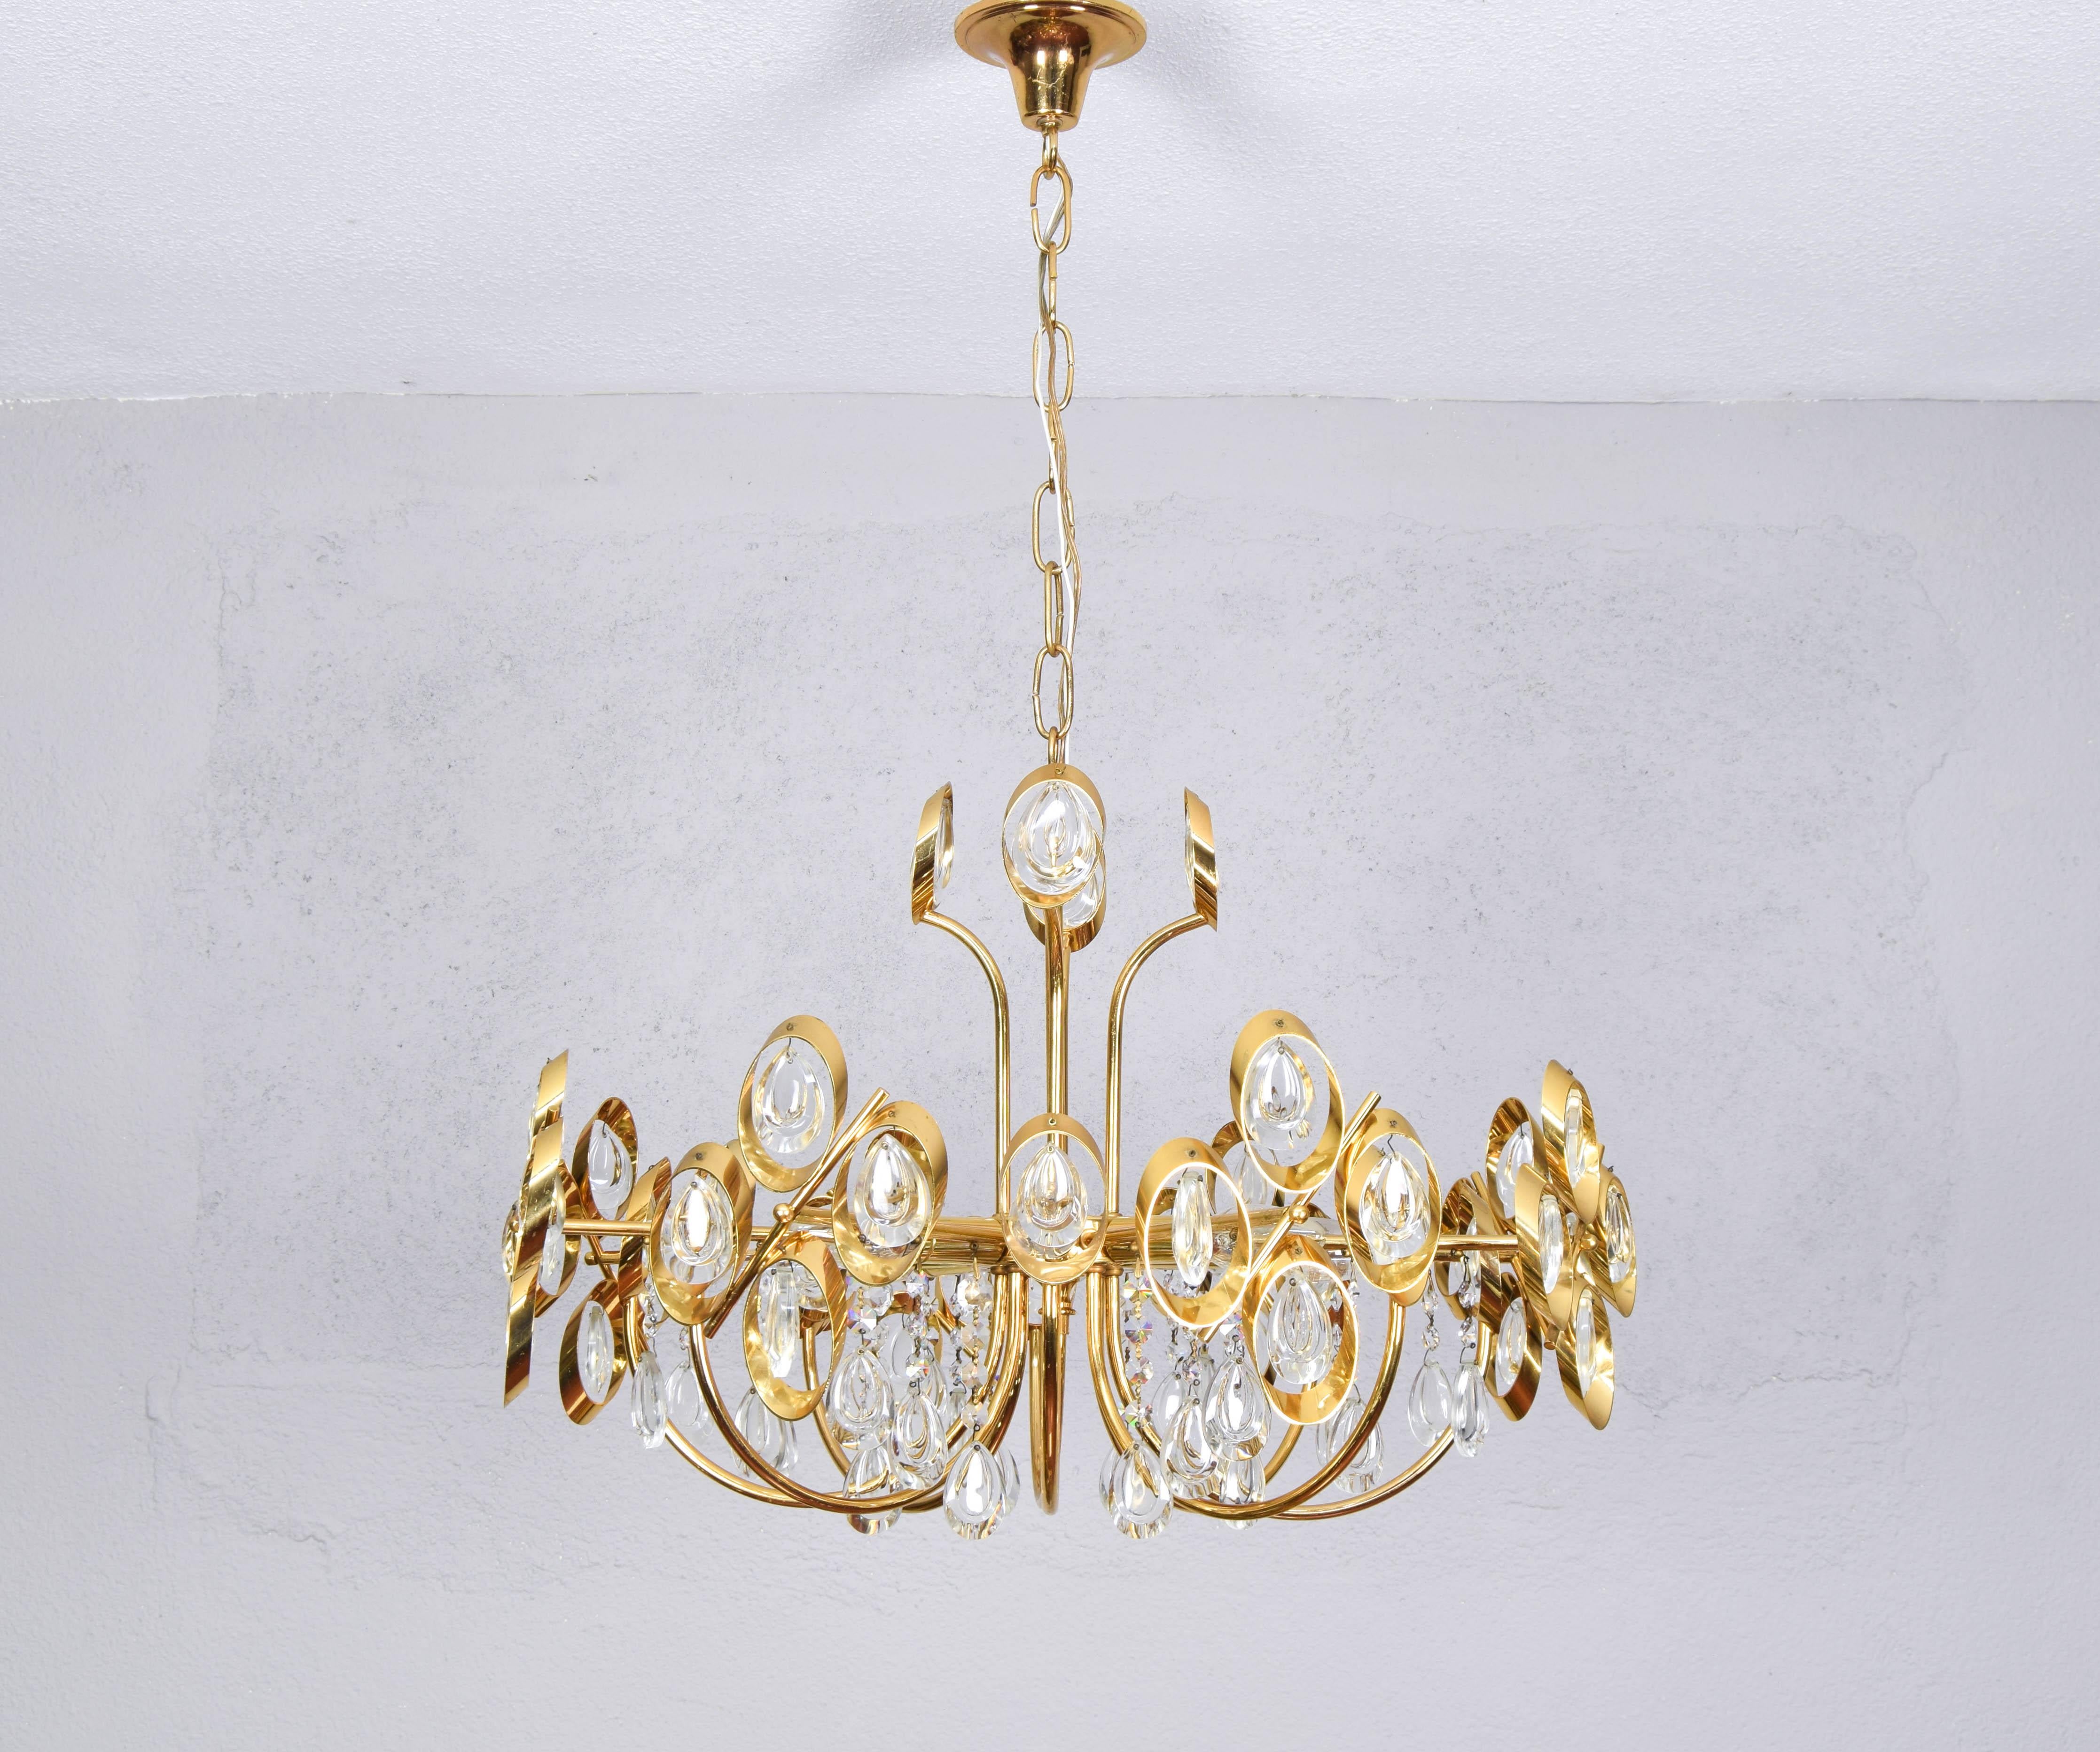 Dazzling Chandelier in golden brass and crystals, made by Palwa Germany in the 60's.
Spectacular piece made up of 16 arms, 8 of them have four crystals each framed in brass at their end and another 8 arms have a crystal at the end, also framed in